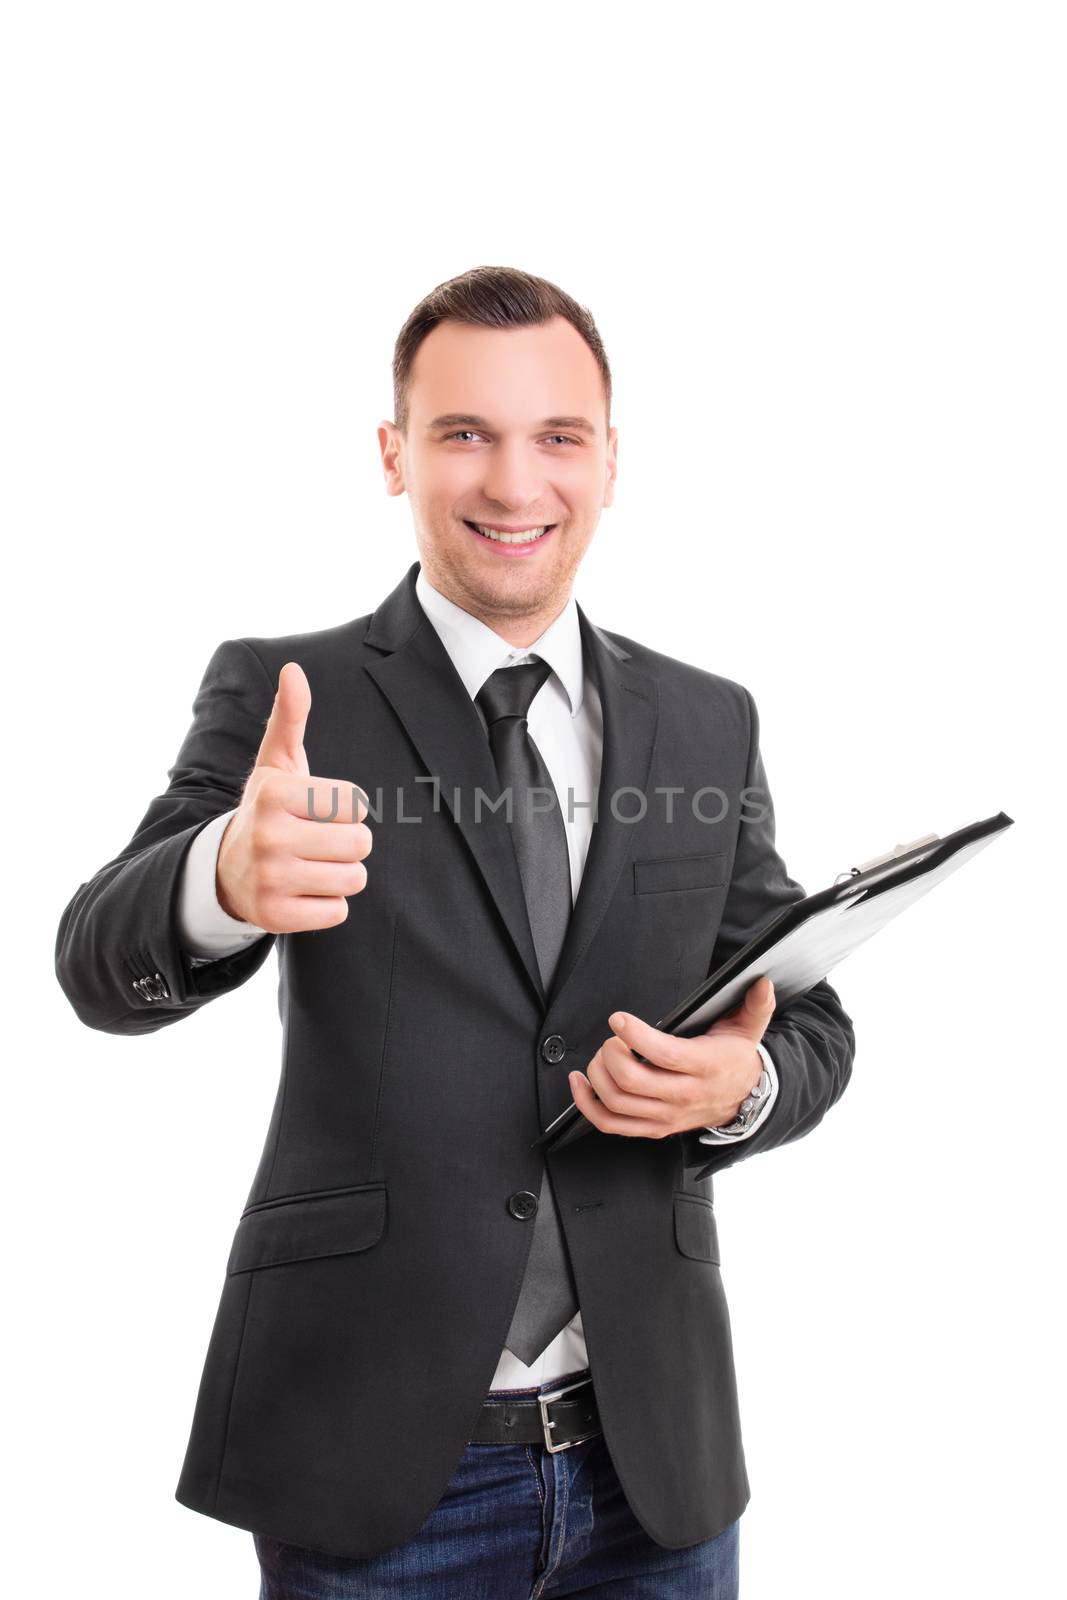 Handsome confident smiling businessman in a suit standing, holding a clipboard and giving thumb up gesture, isolated on white background. Young attractive businessman wearing a suit and tie giving thumb up.